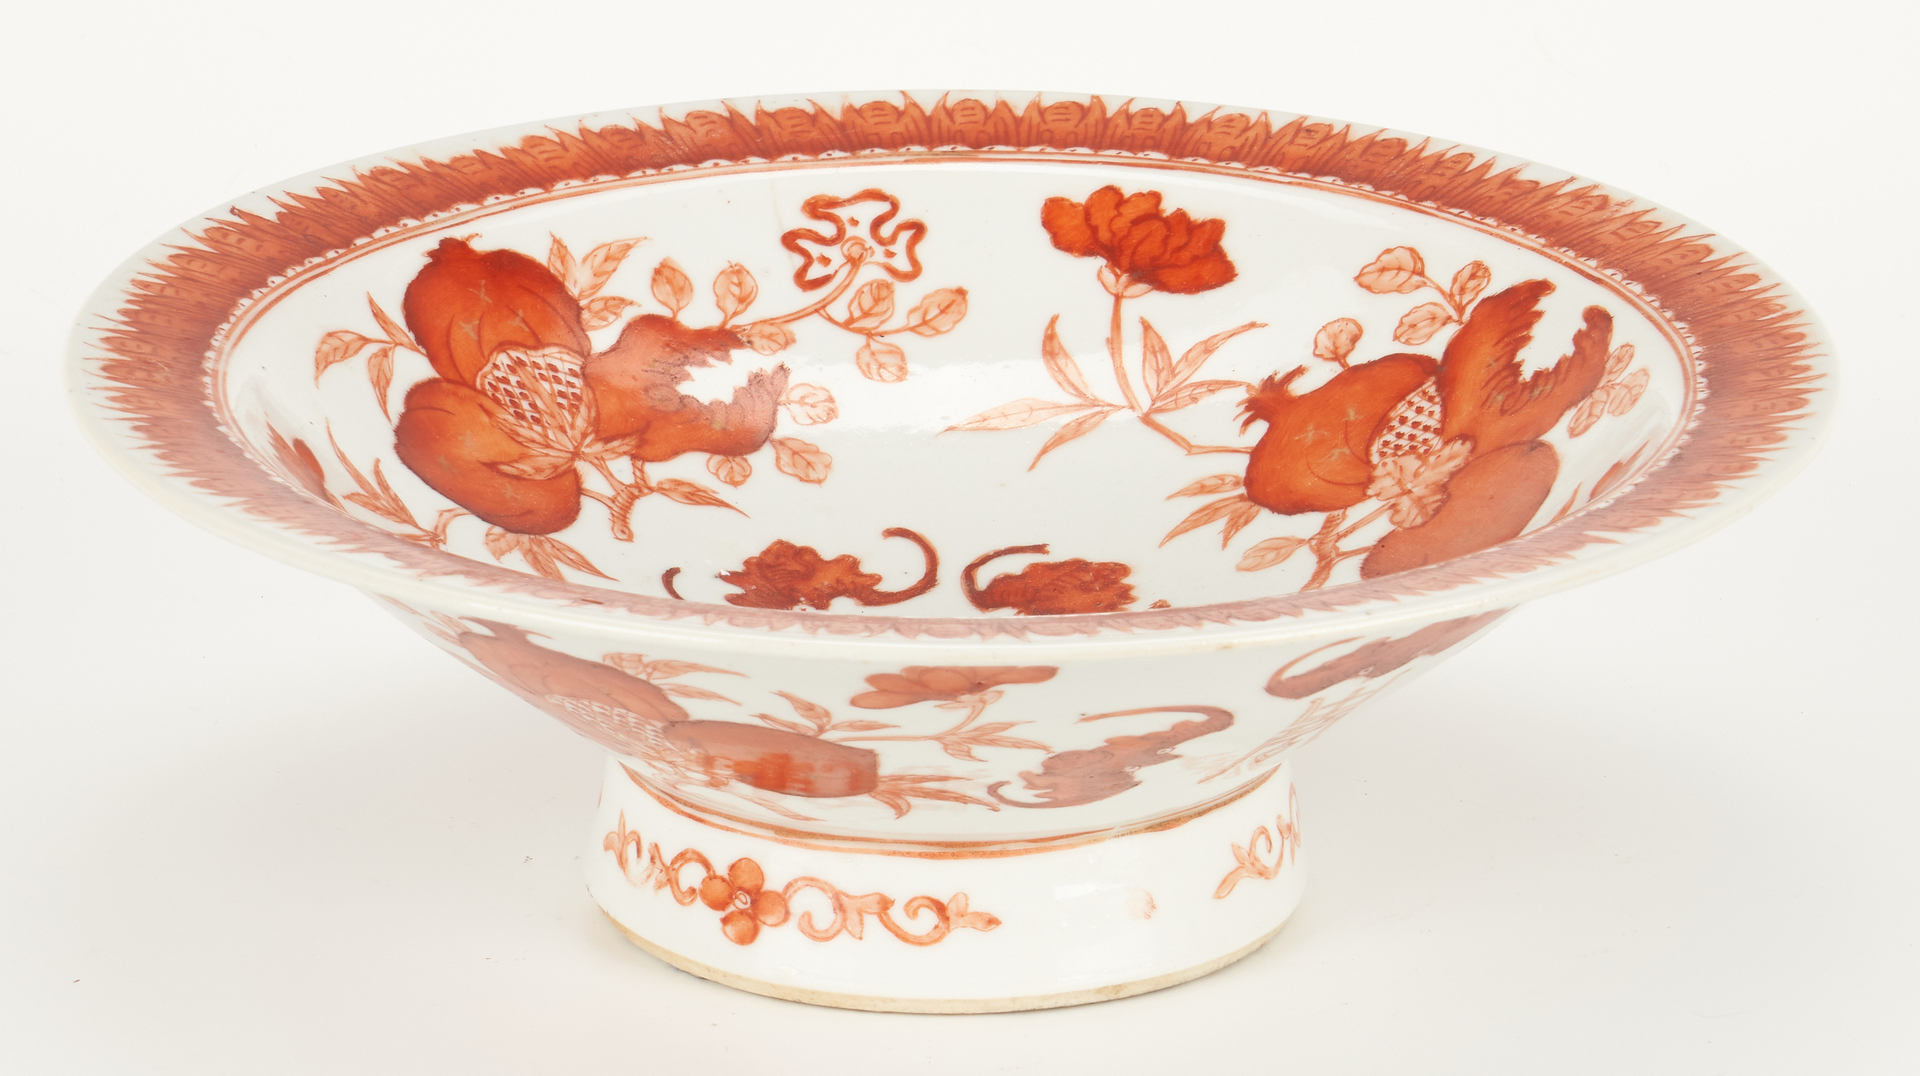 Lot 21: Chinese Famille Rose Tray and Bowl with Bats